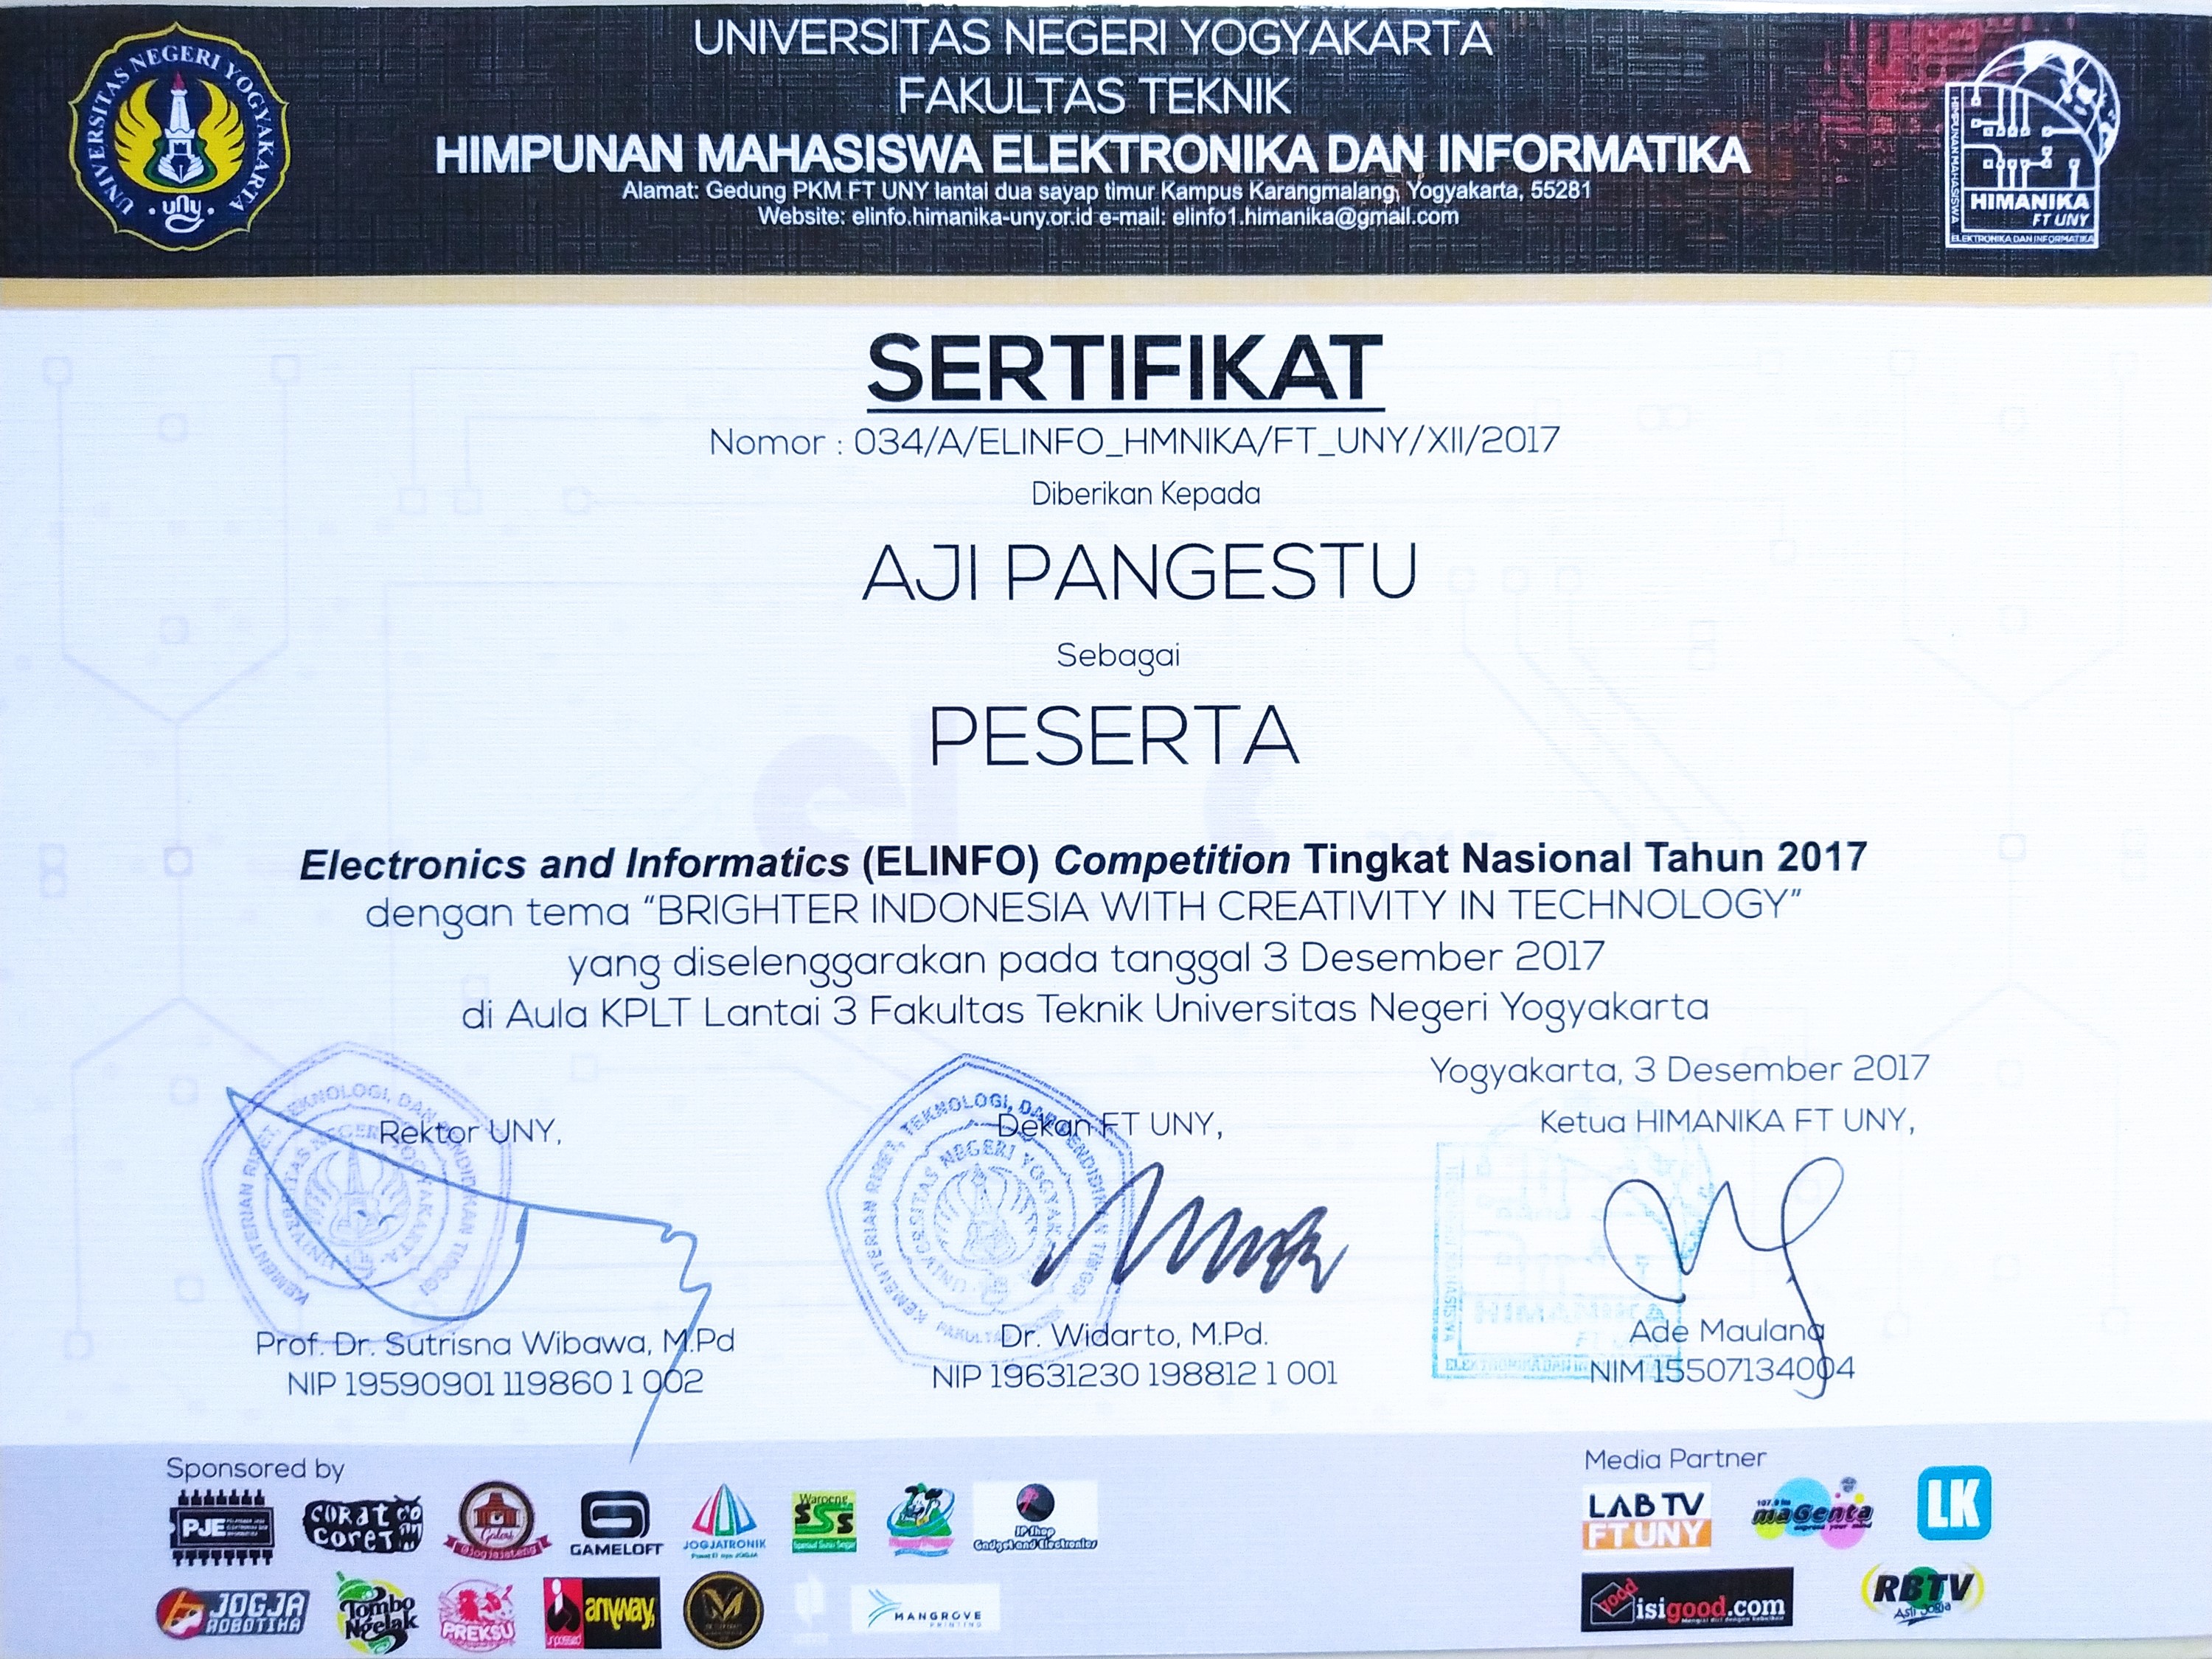 Foto ELINFO (Electronics and Informatics) Competition Tingkat Nasional